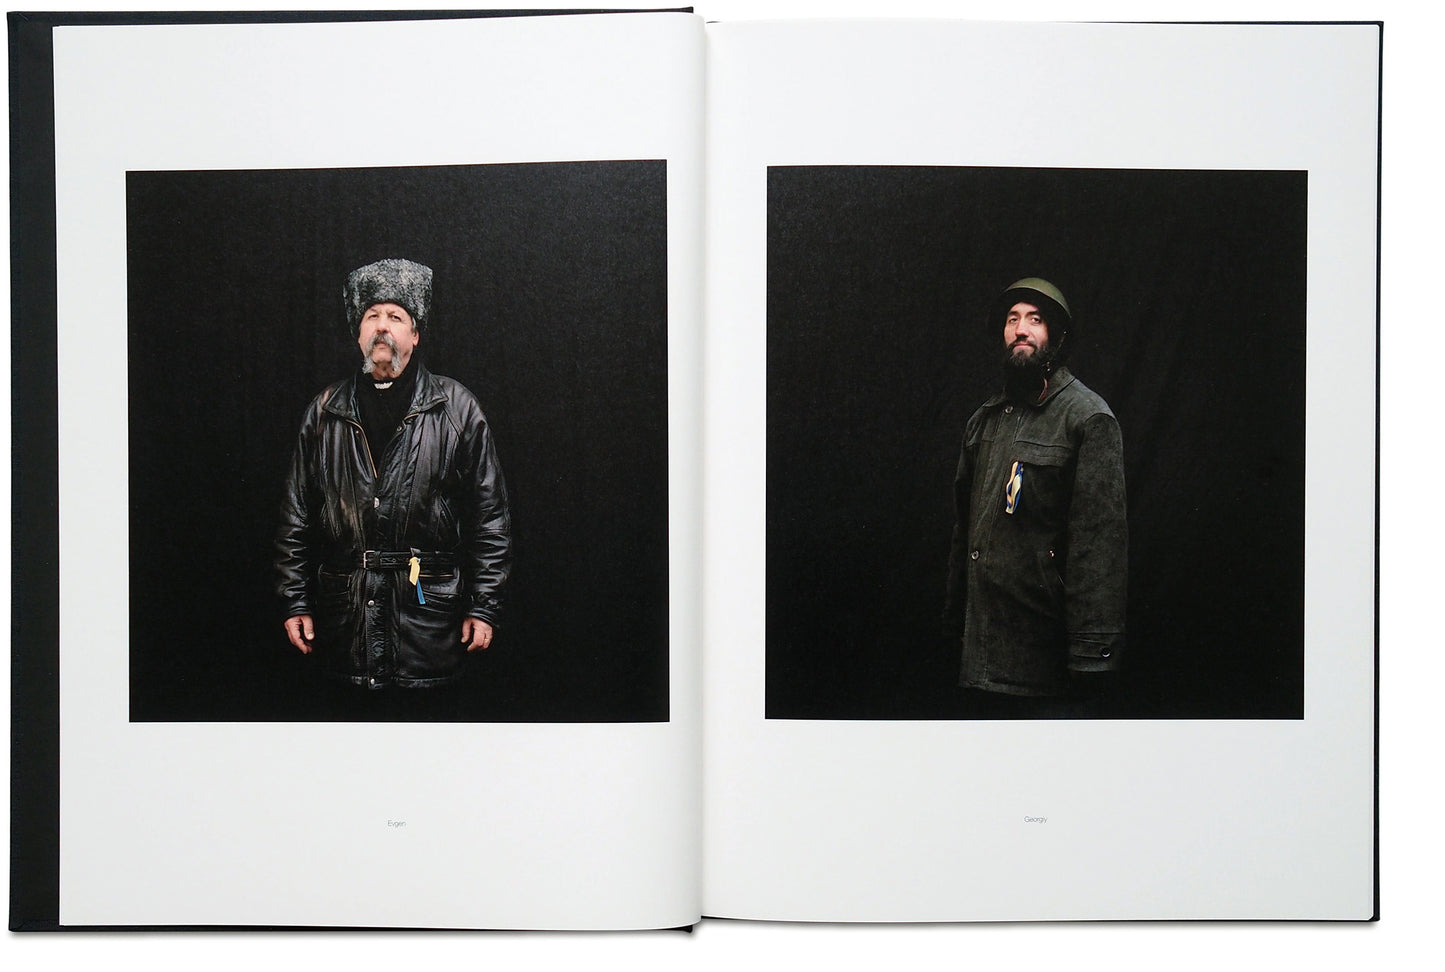 Maidan - Portraits from the Black Square